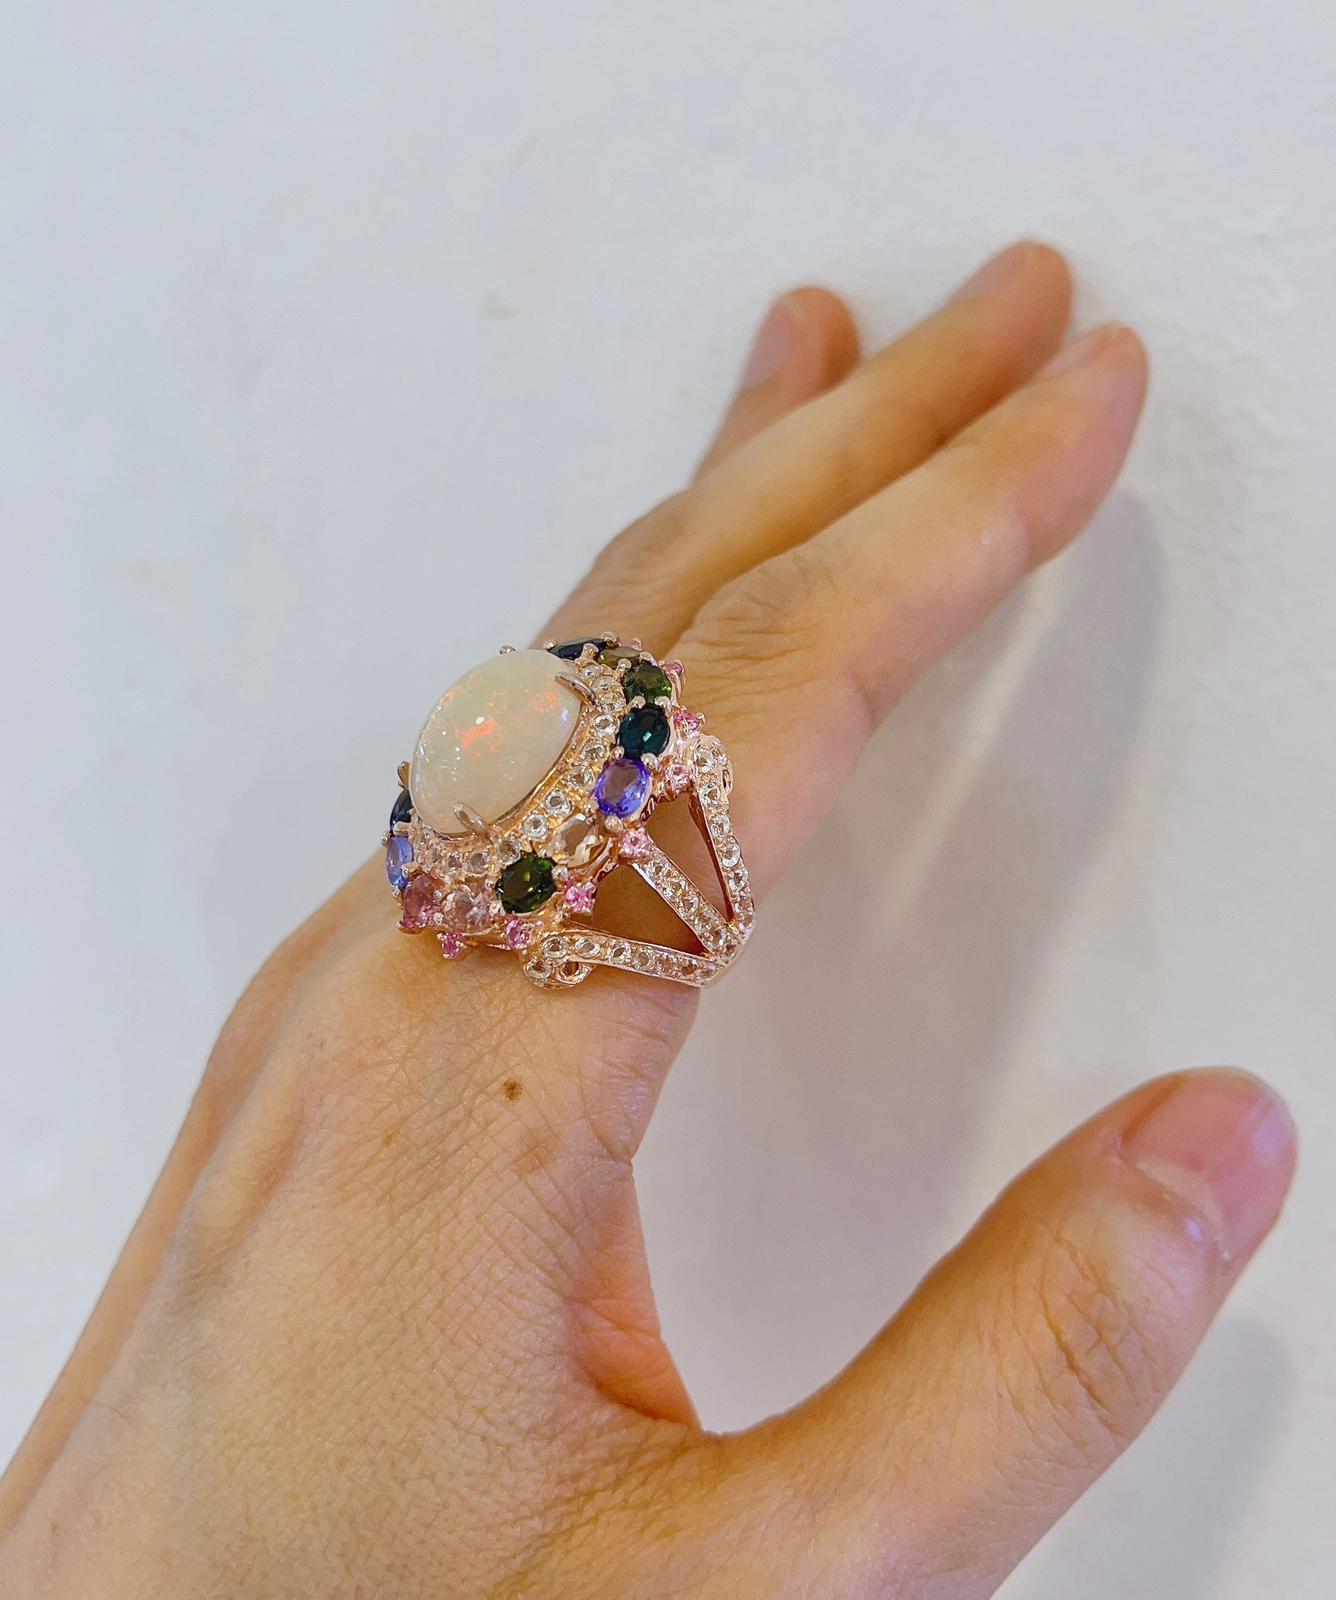 Bochic “Capri” Opal & Multi Color Sapphire Cocktail Ring Set 22k Gold & Silver In New Condition For Sale In New York, NY